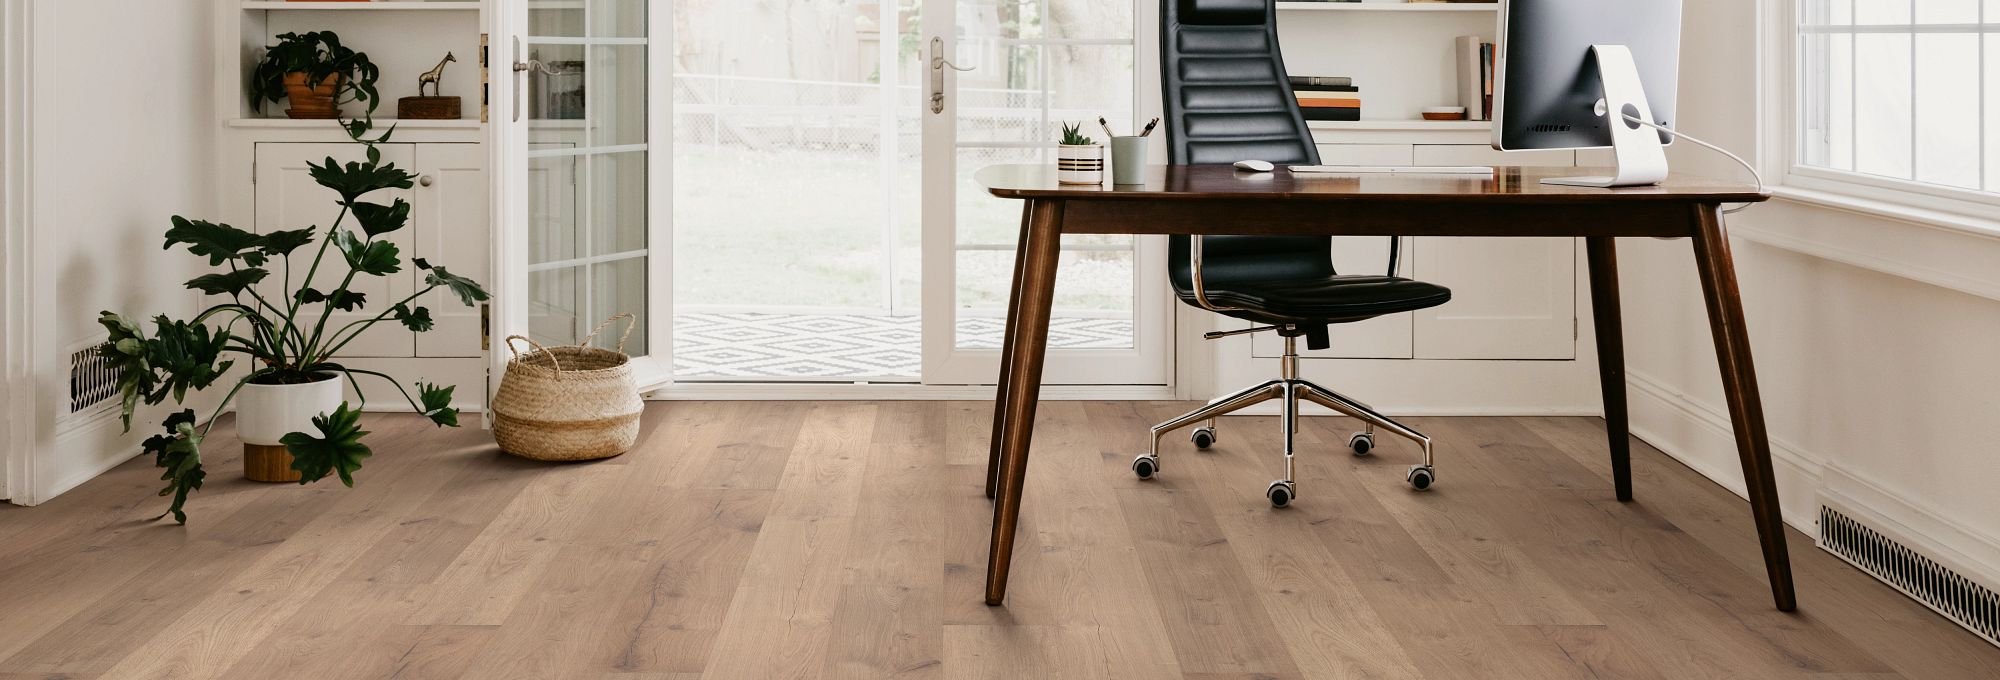 Office with wood-look laminate flooring from The Carpet Shoppe Inc in Tulare, CA